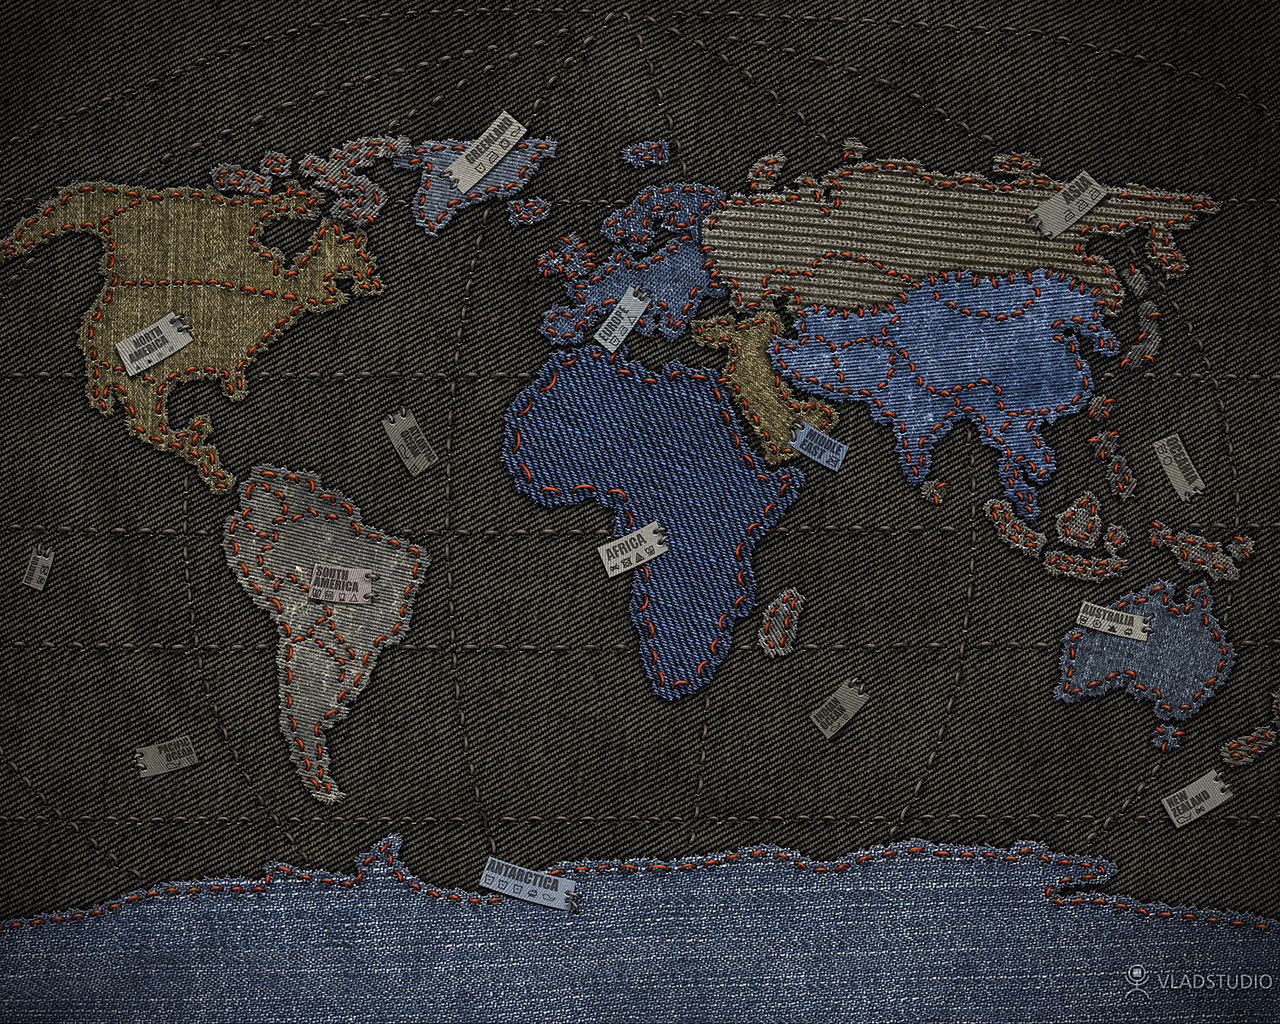 Try this map art from Vlad Studio featuring a denim fabric and selected 